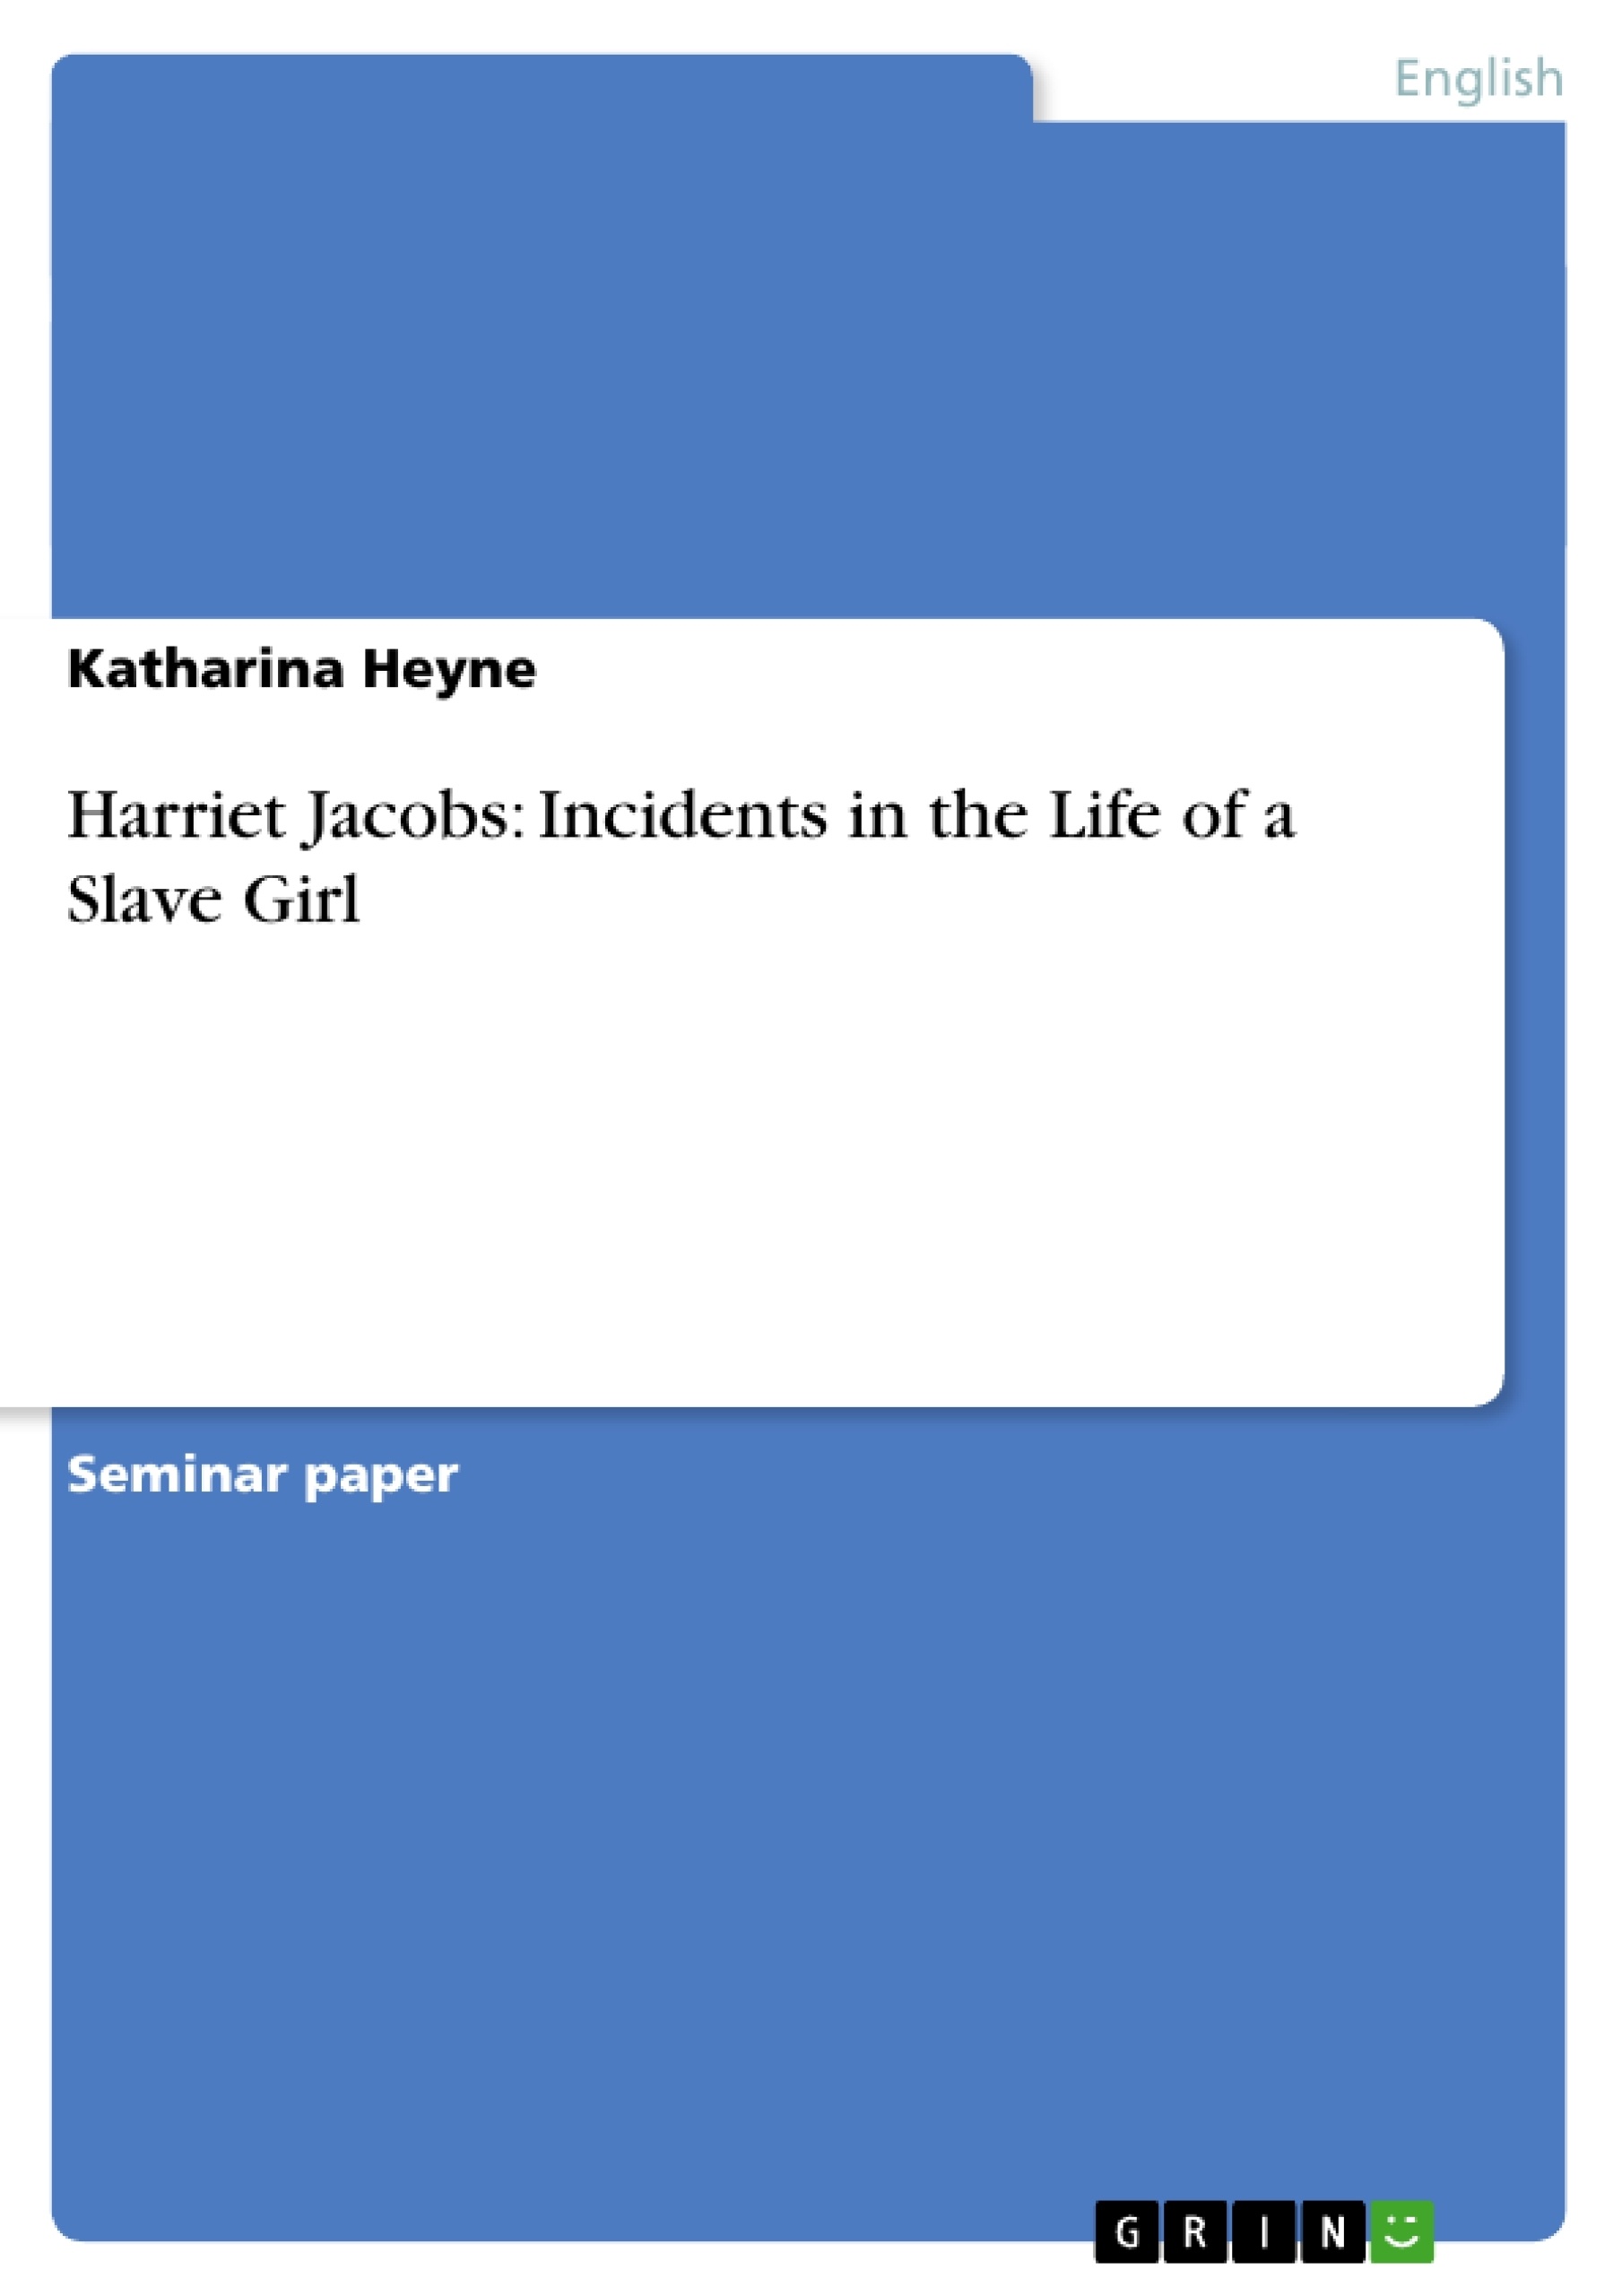 Titre: Harriet Jacobs: Incidents in the Life of a Slave Girl